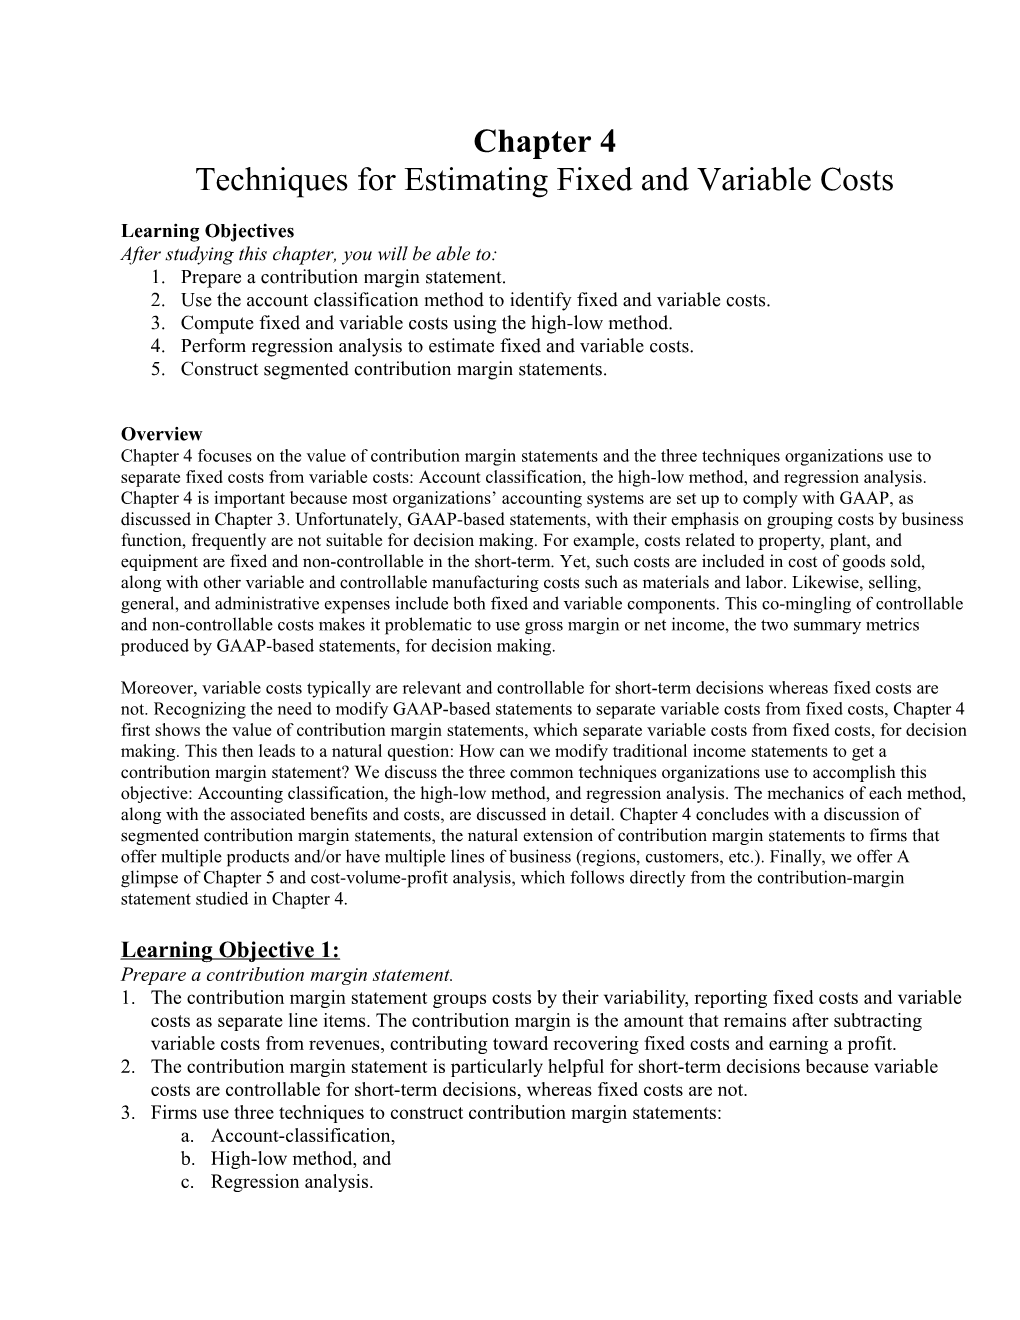 Techniques for Estimating Fixed and Variable Costs